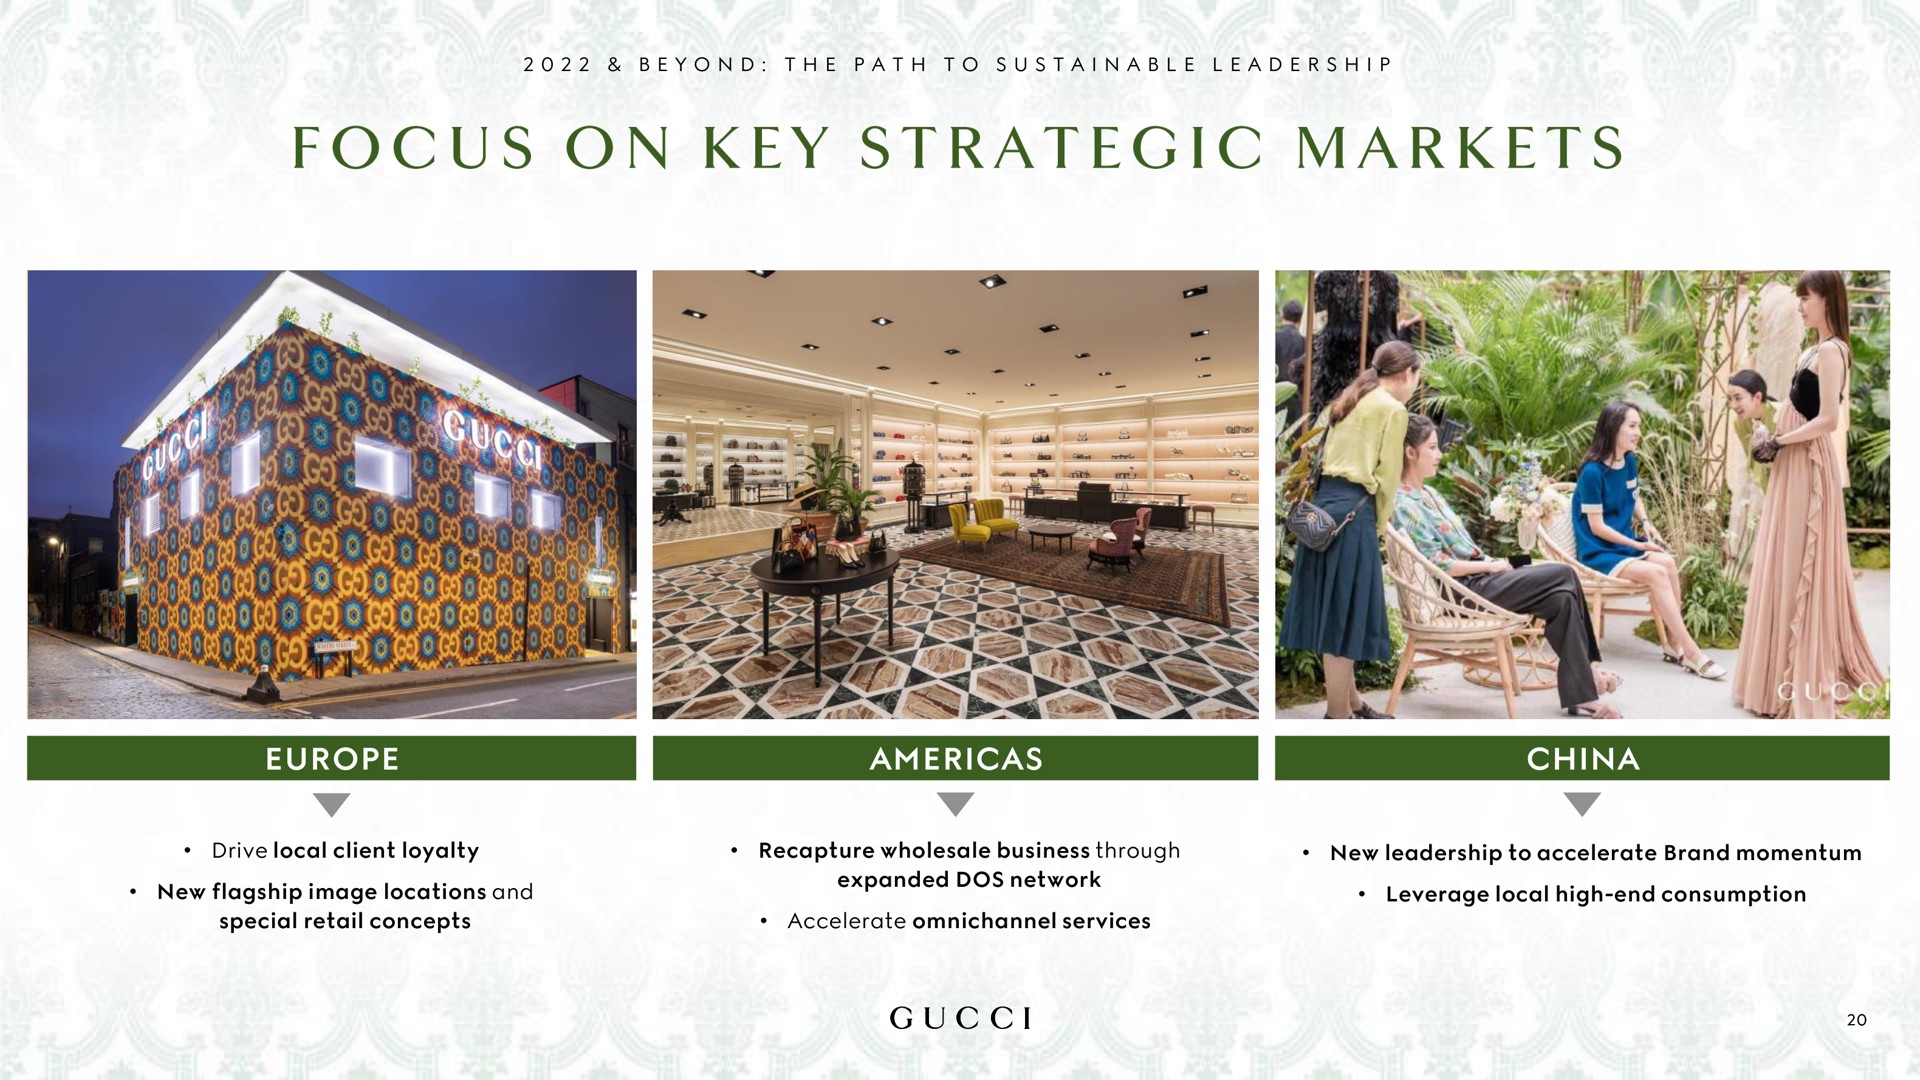 a a i a a i china drive local client loyalty new flagship image locations and special retail concepts recapture wholesale business through expanded dos network accelerate services new leadership to accelerate brand momentum leverage local high end consumption focus on key strategic markets | Kering